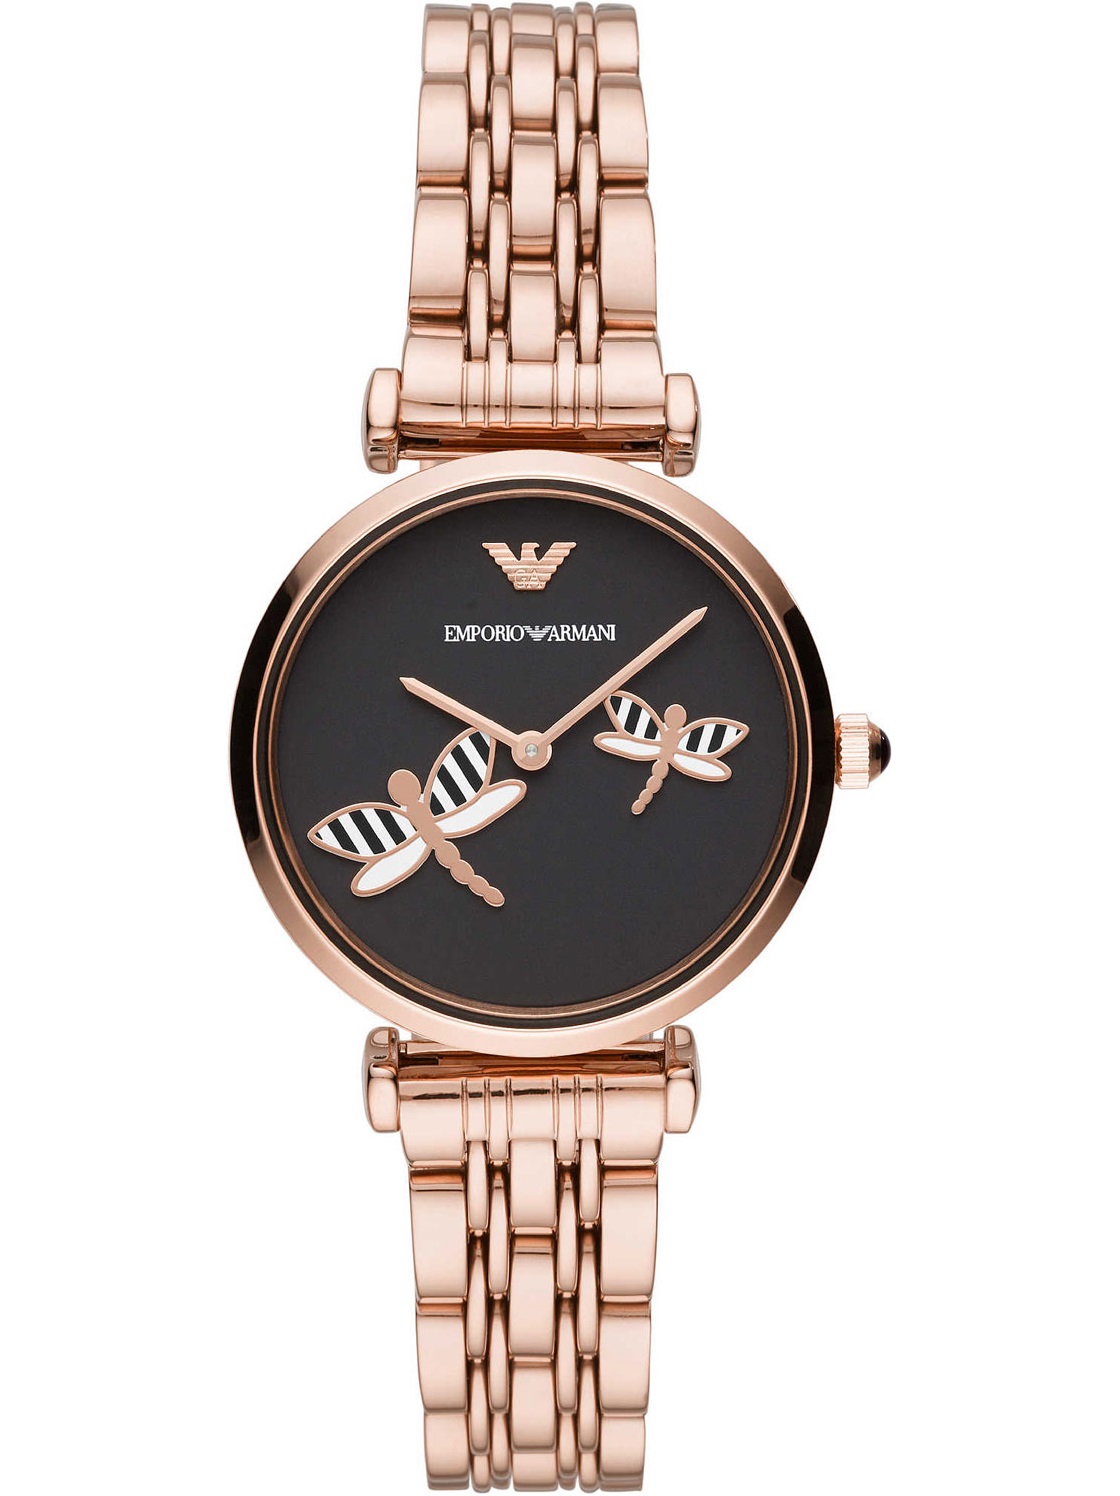 ĐỒNG HỒ NỮ EMPORIO ARMANI DRAGONFLY GIANNI T-BAR AR11206 BLACK DIAL WATCH FOR WOMEN 9